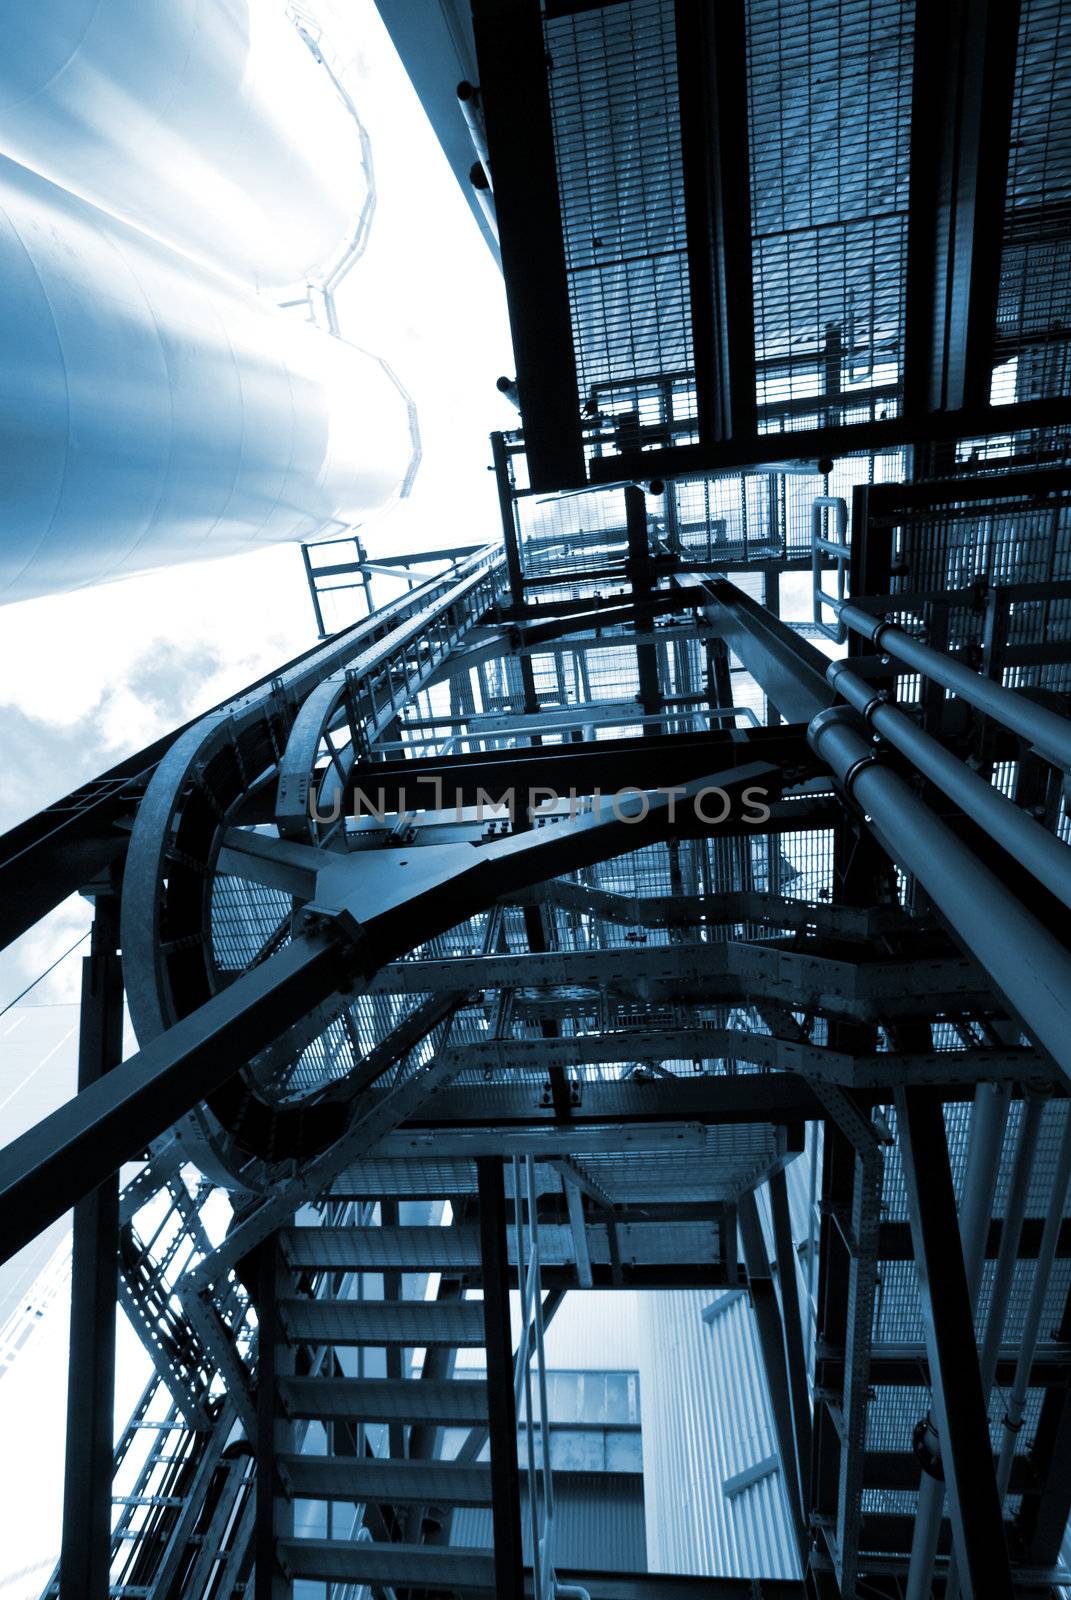 industrial ladders, cables, pipelines in blue tones by nostal6ie